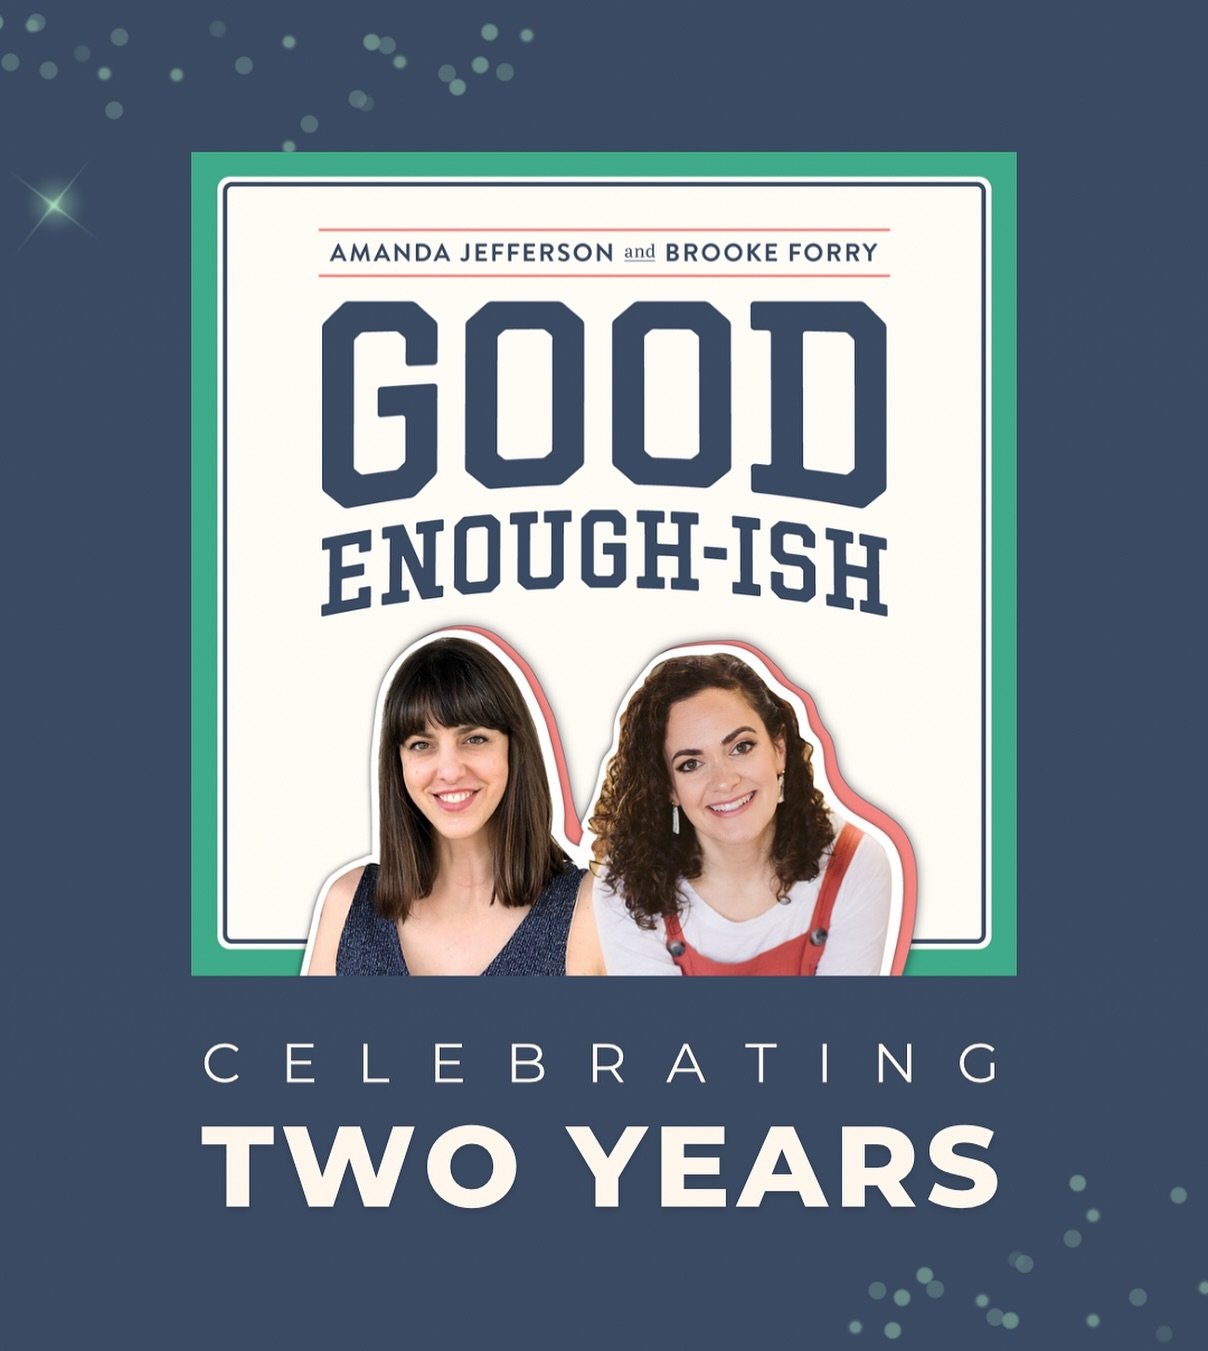 The first episode of Good Enough-ish dropped two years ago today! 🎉 We have grown and evolved along with the podcast and we are so grateful to our lisheners for keeping us going. Here&rsquo;s to many more episodes of joy-sparking moments, favors to 